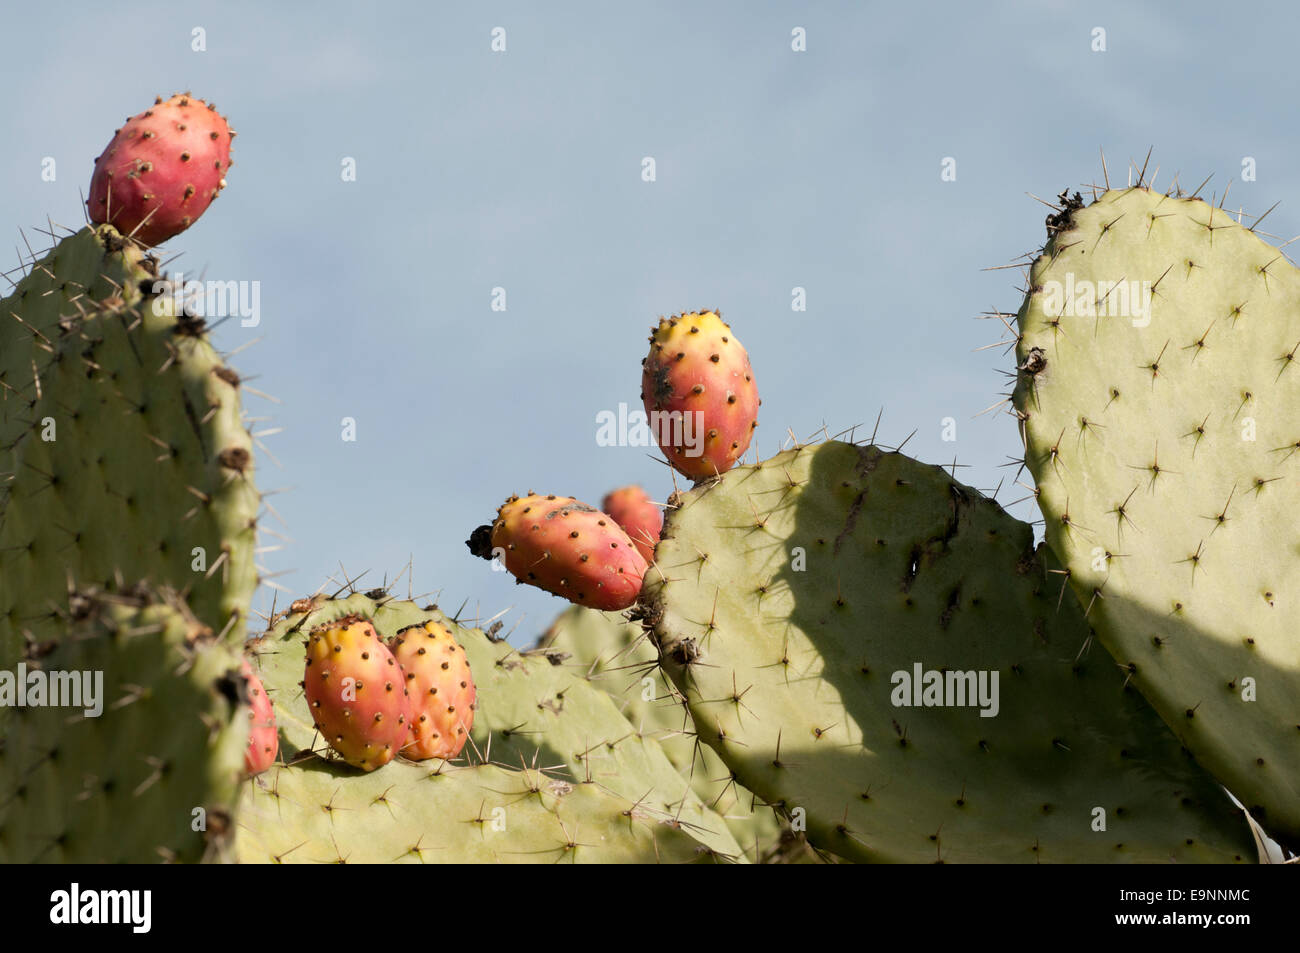 Prickly Pear fruits seen in Morocco against a bluish sky Stock Photo